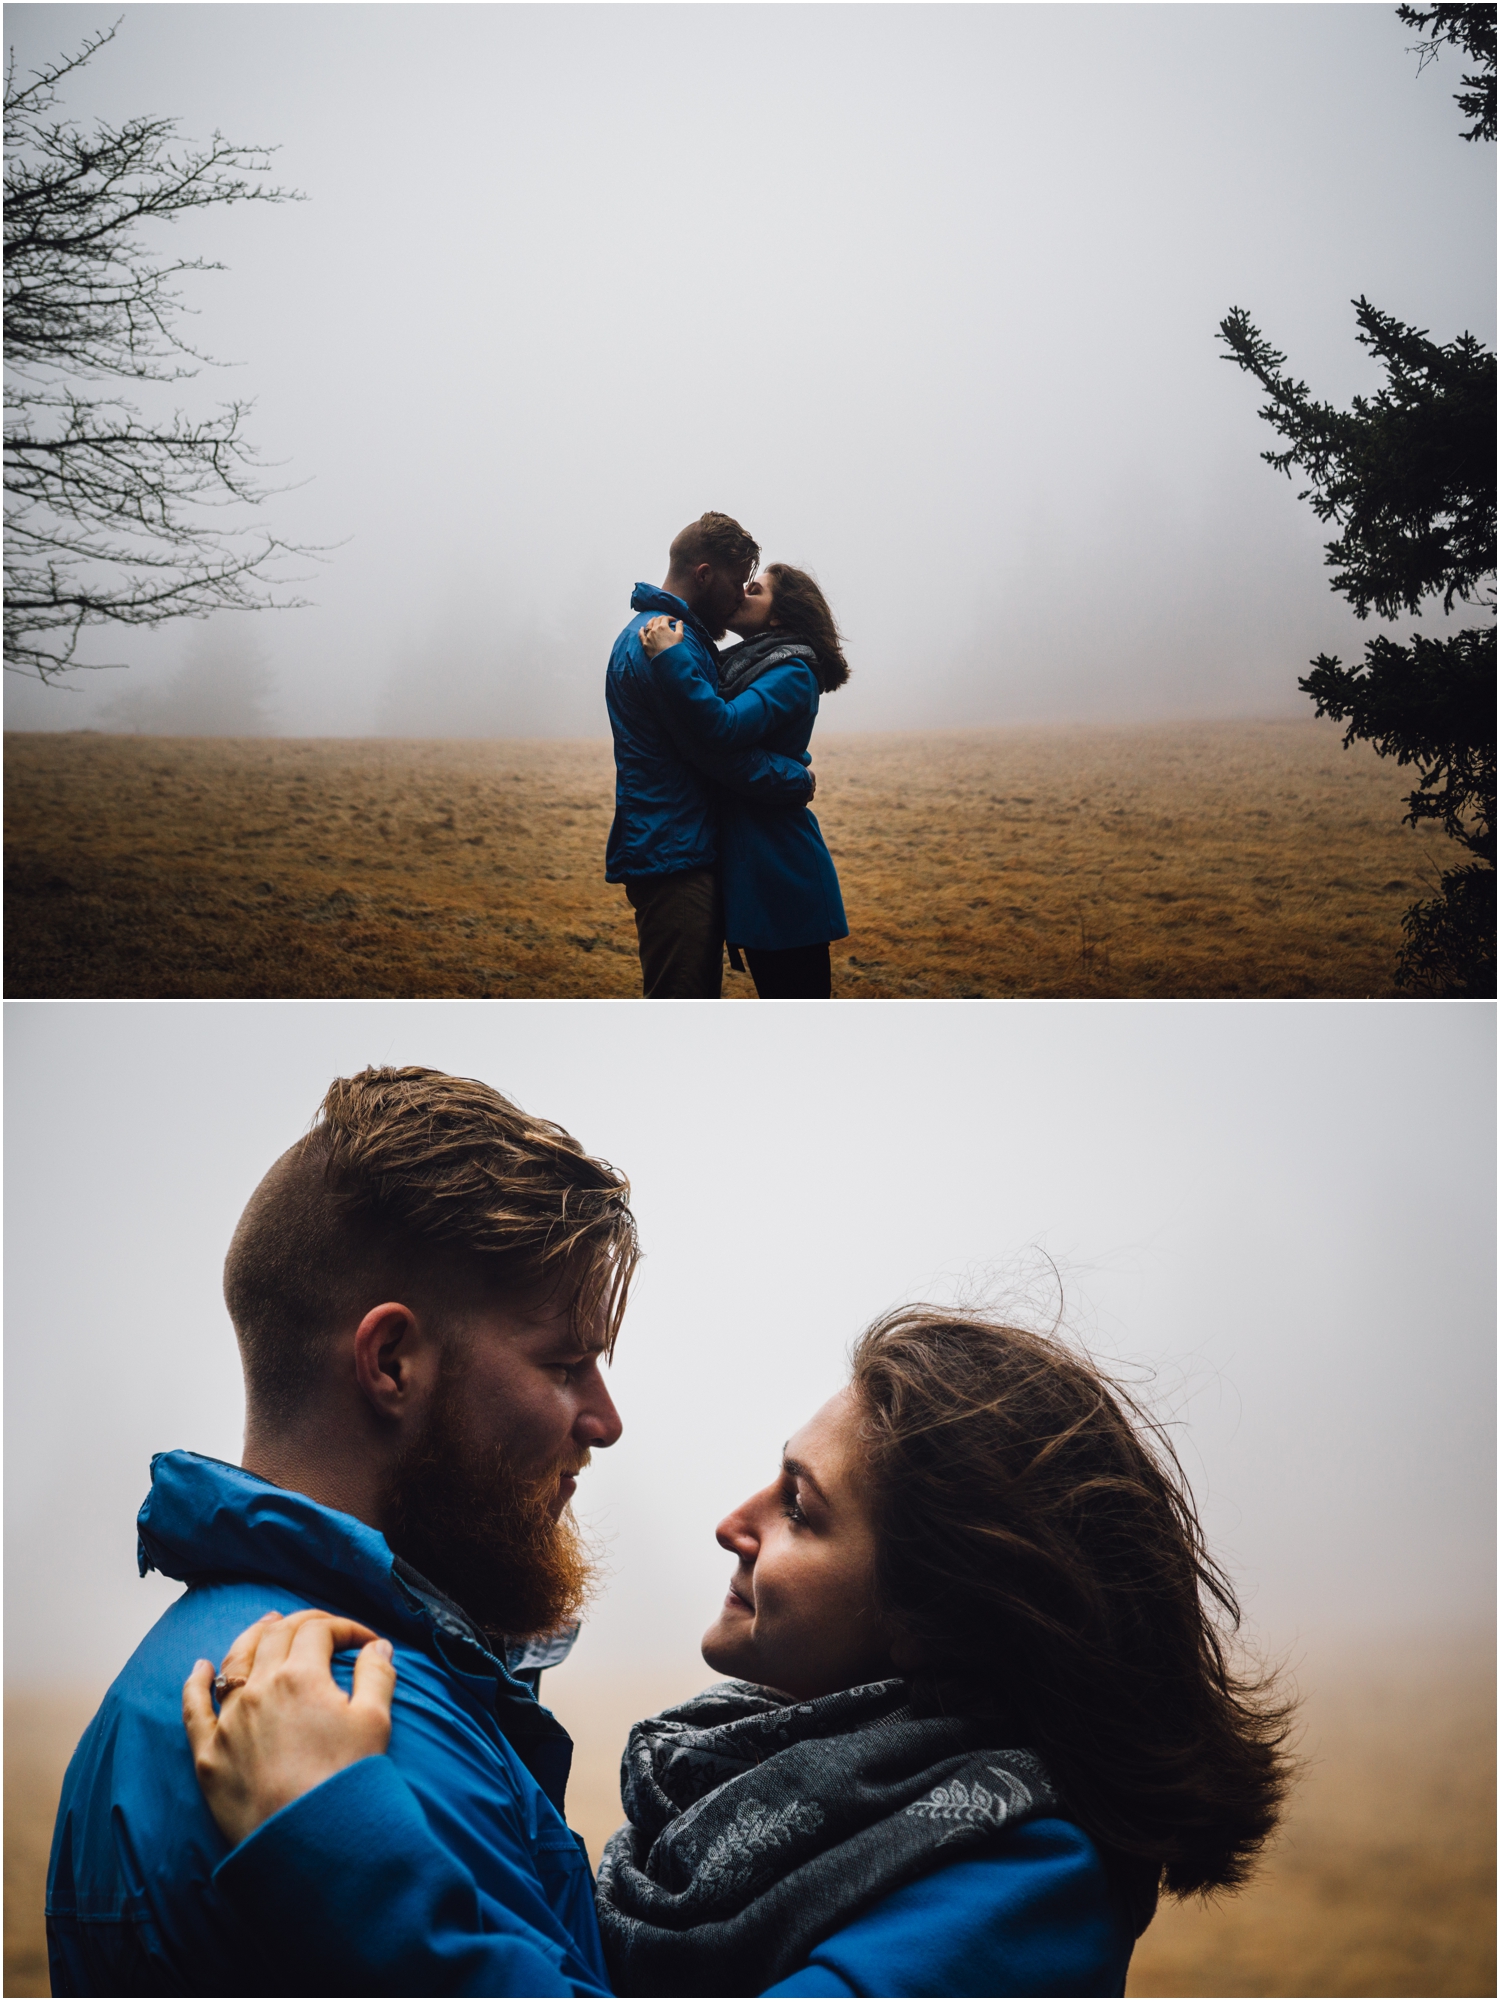 katy-sergent-photography-grayson-highlands-engagement-session-mouth-of-wilson-virginia-damascus-appalachian-trail-tennessee-wedding-elopement_0009.jpg